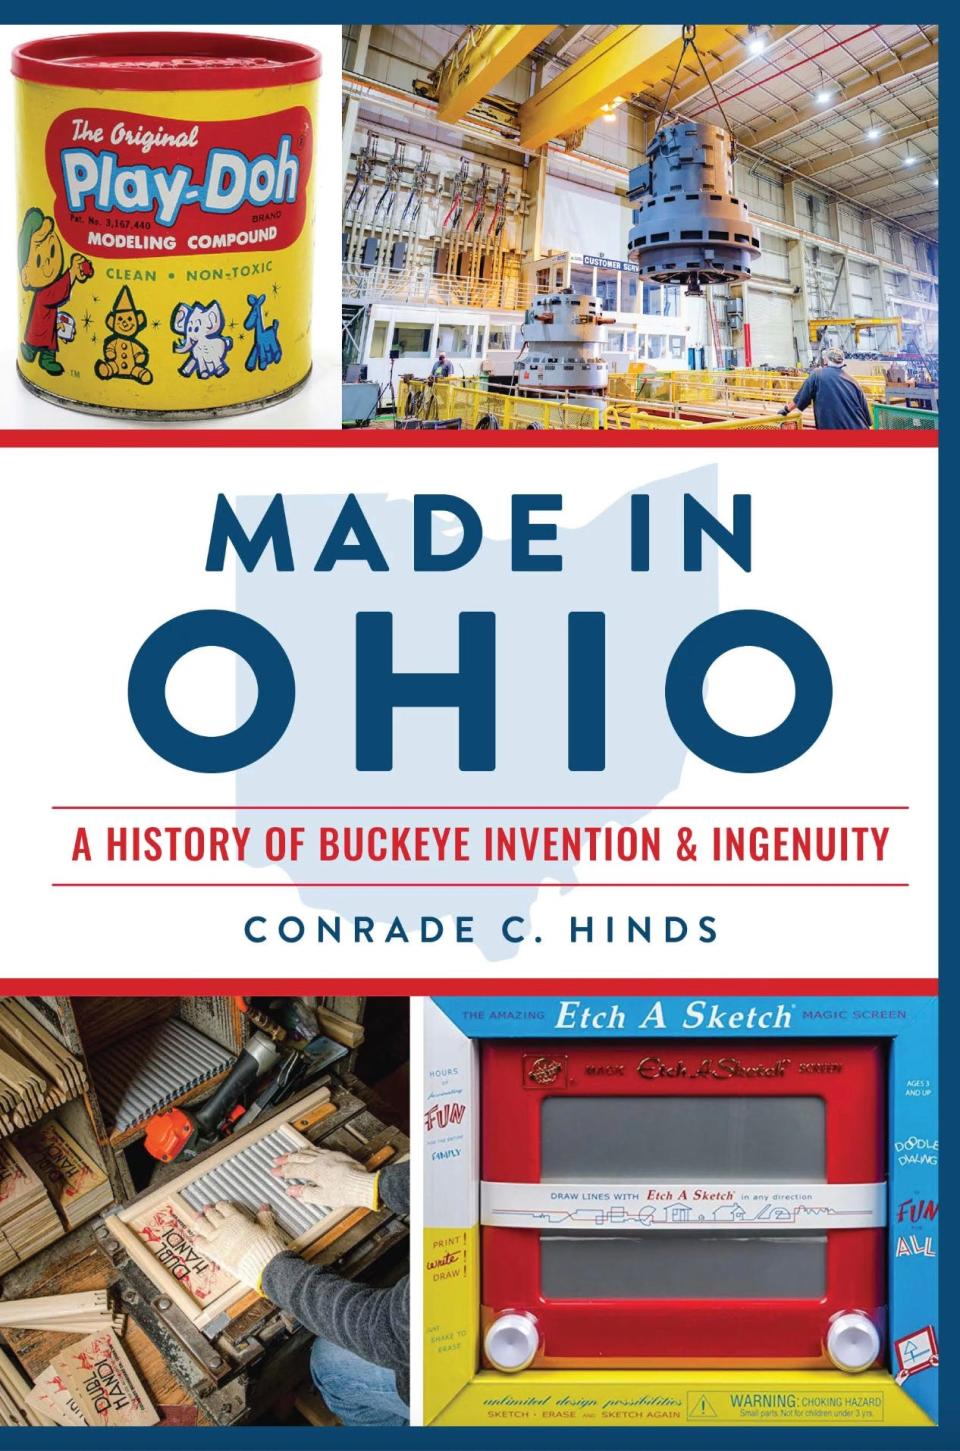 “Made in Ohio: A History of Buckeye Invention & Innovation” by Conrade C. Hinds shines a light on the state’s heritage of invention and manufacturing.